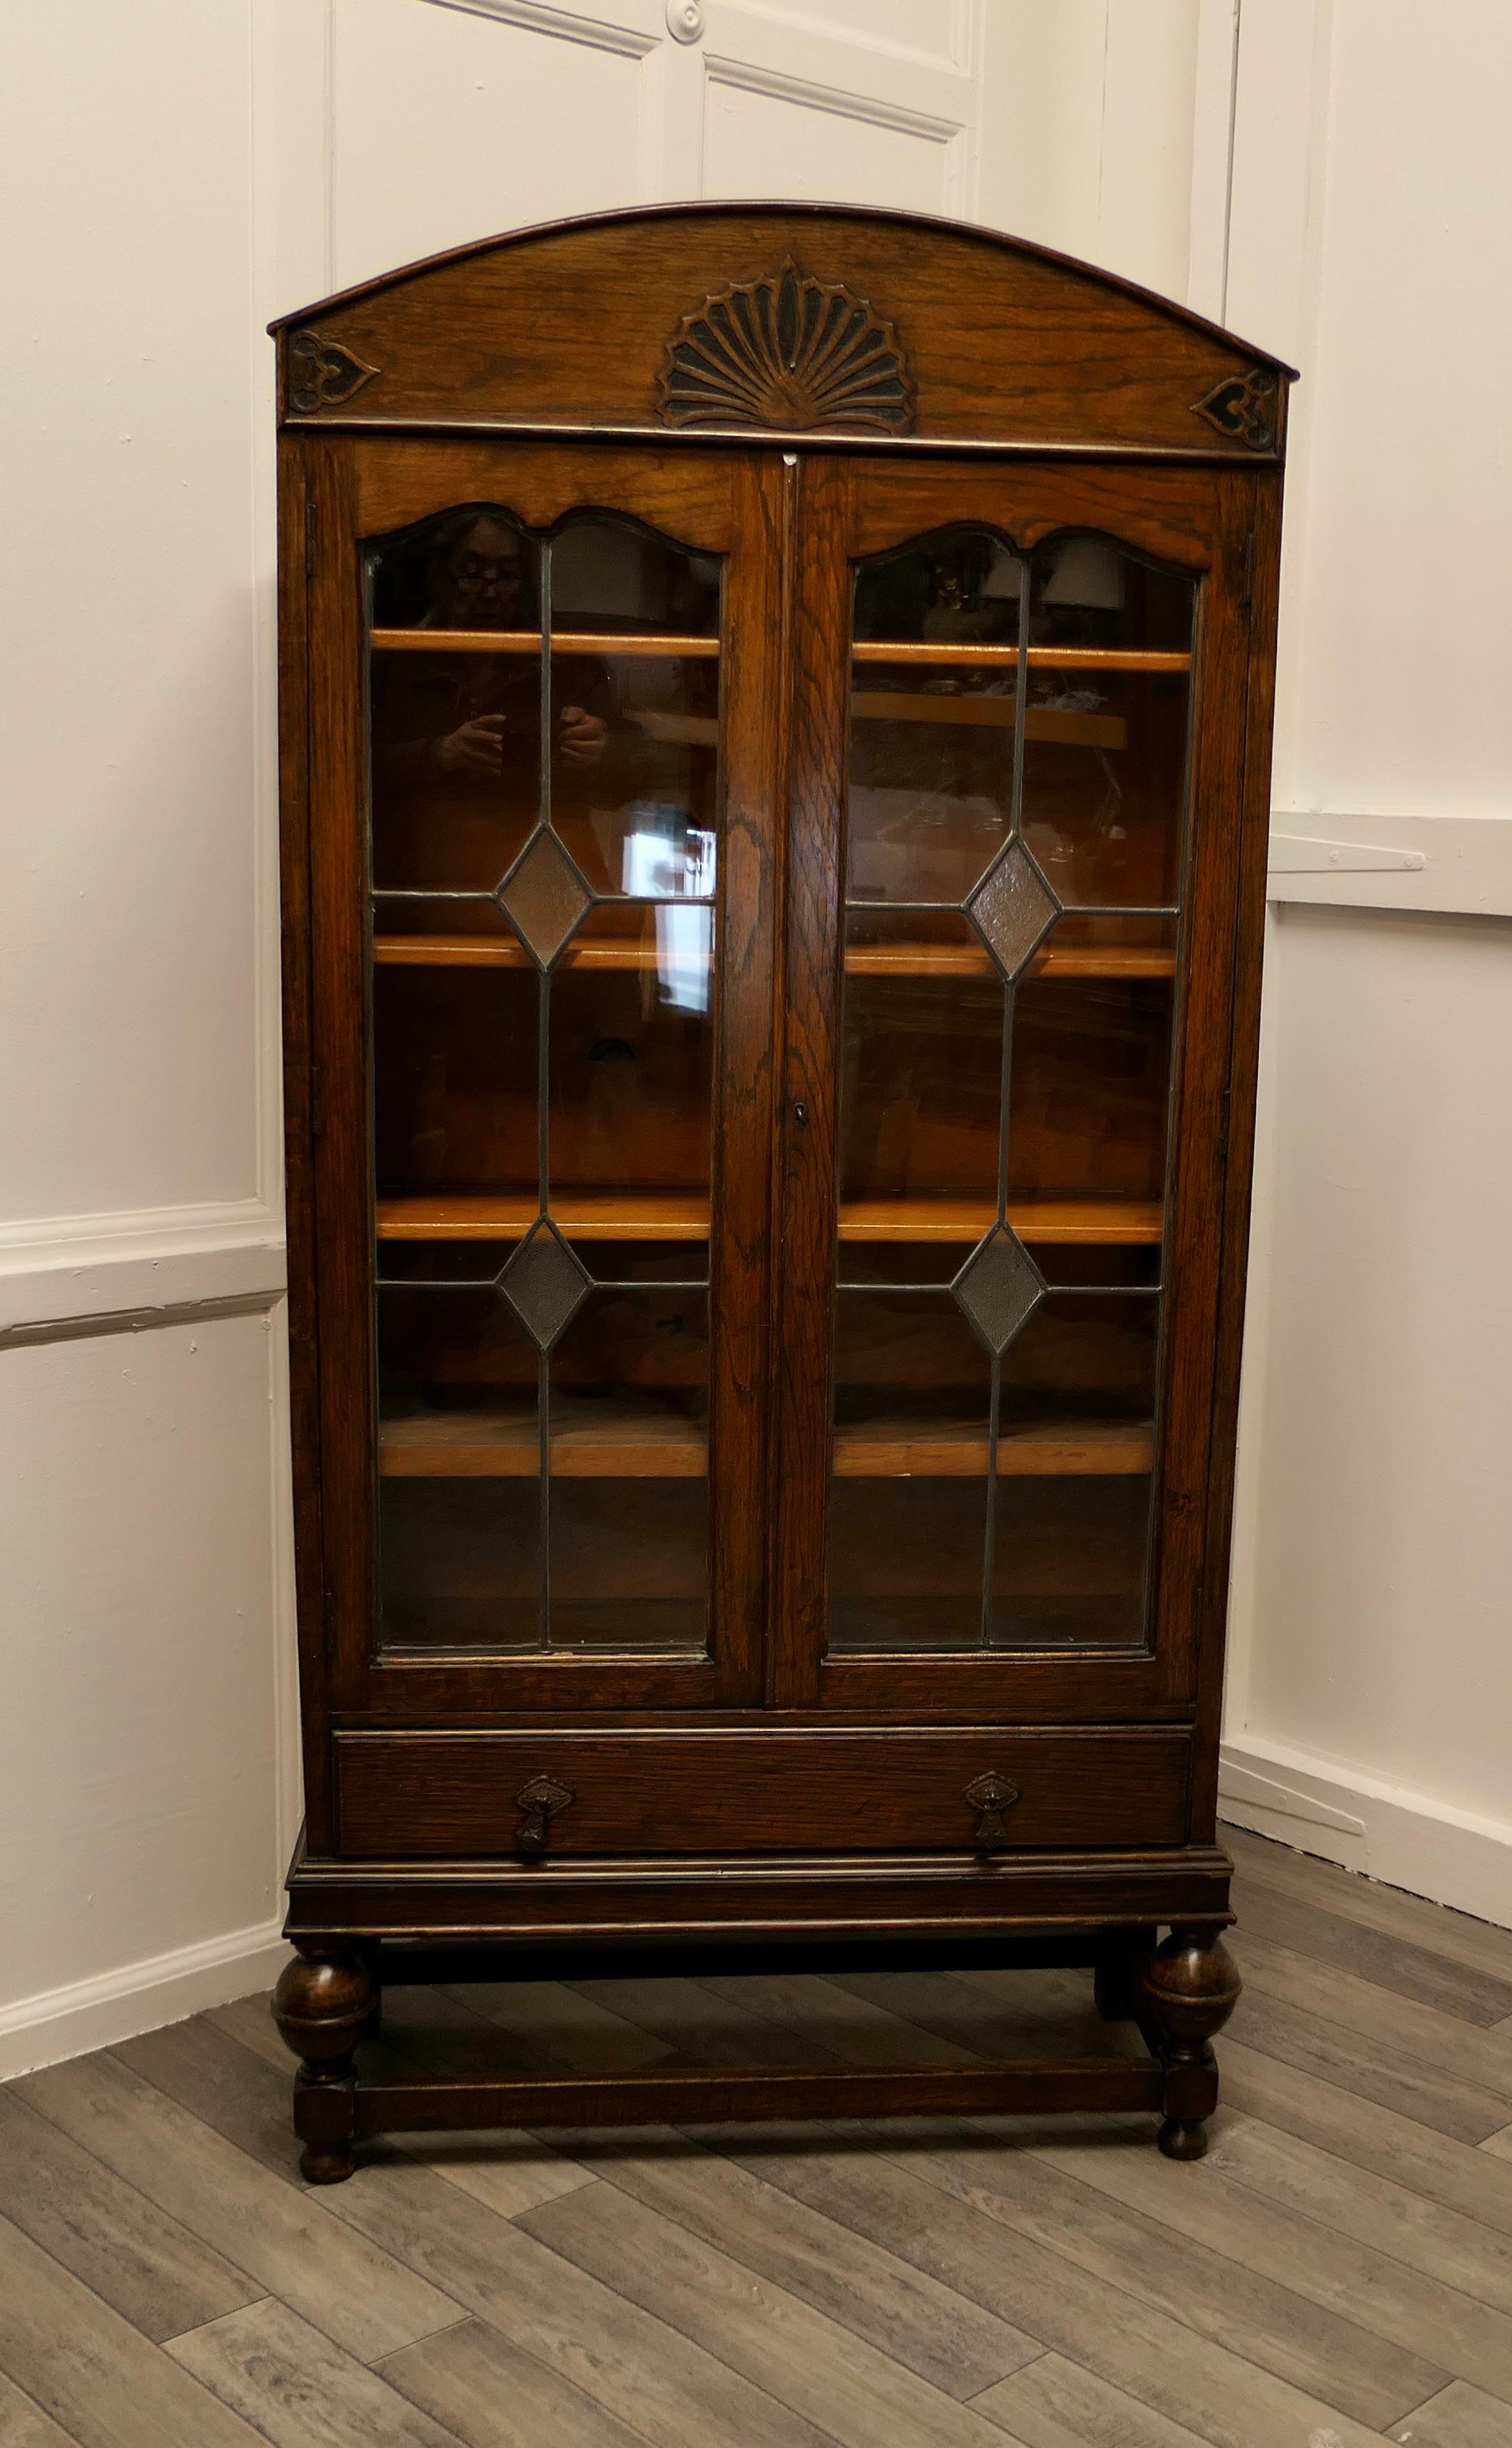 Large Dutch style art deco oak 2 door glazed bookcase.

The bookcase has 5 shelves, these have been fixed on wooden blocks for added strength. The top of the bookcase is domed in the dutch style with a some applied decoration, the doors are made